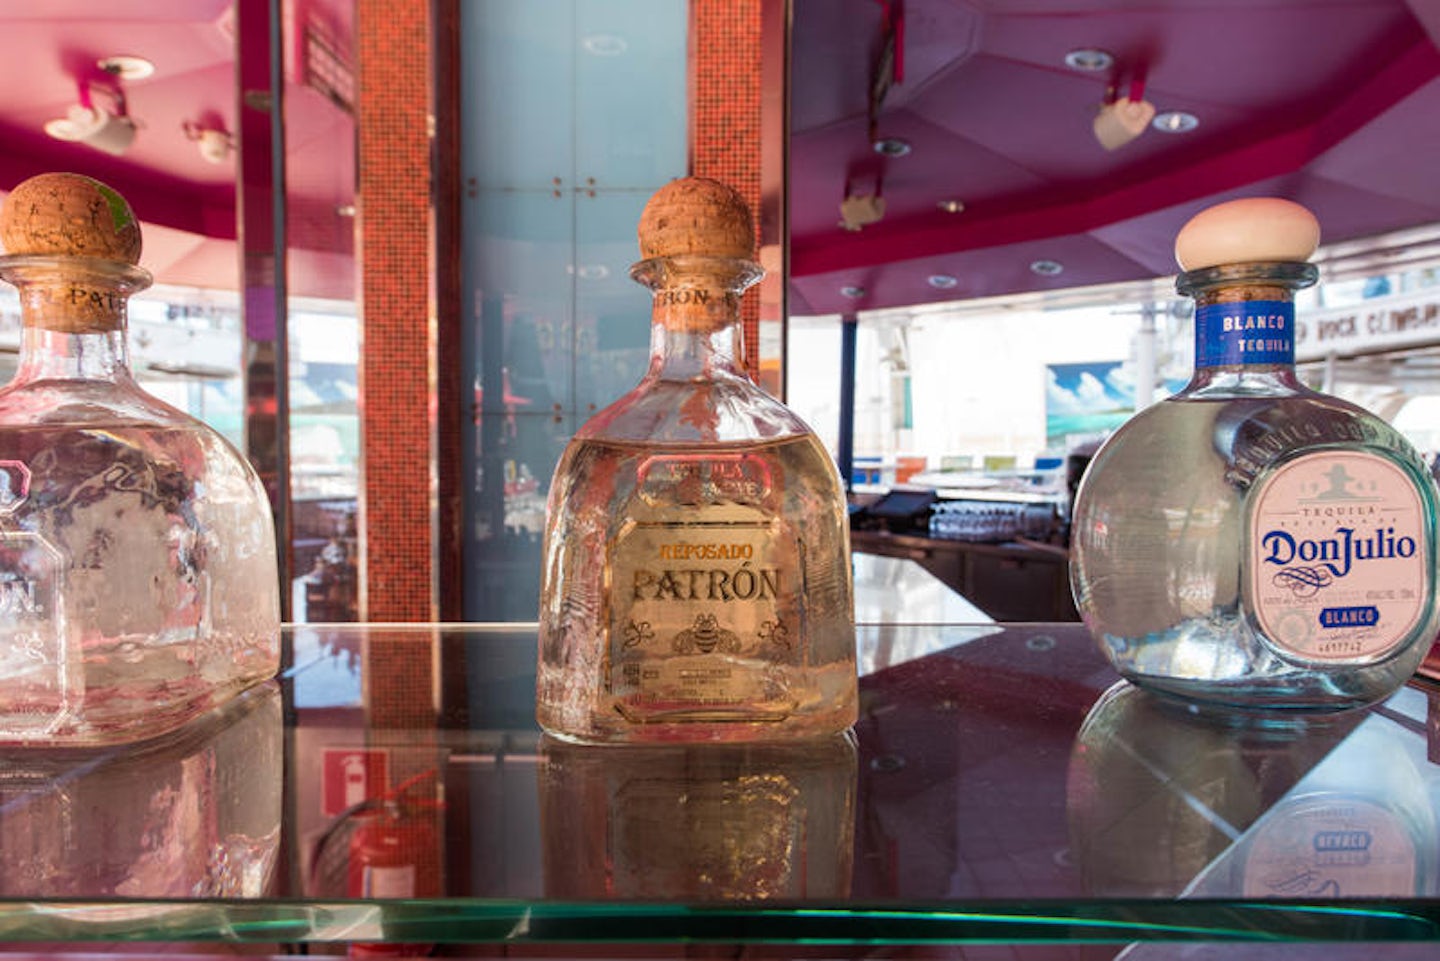 Sabor Tequila Bar on Oasis of the Seas